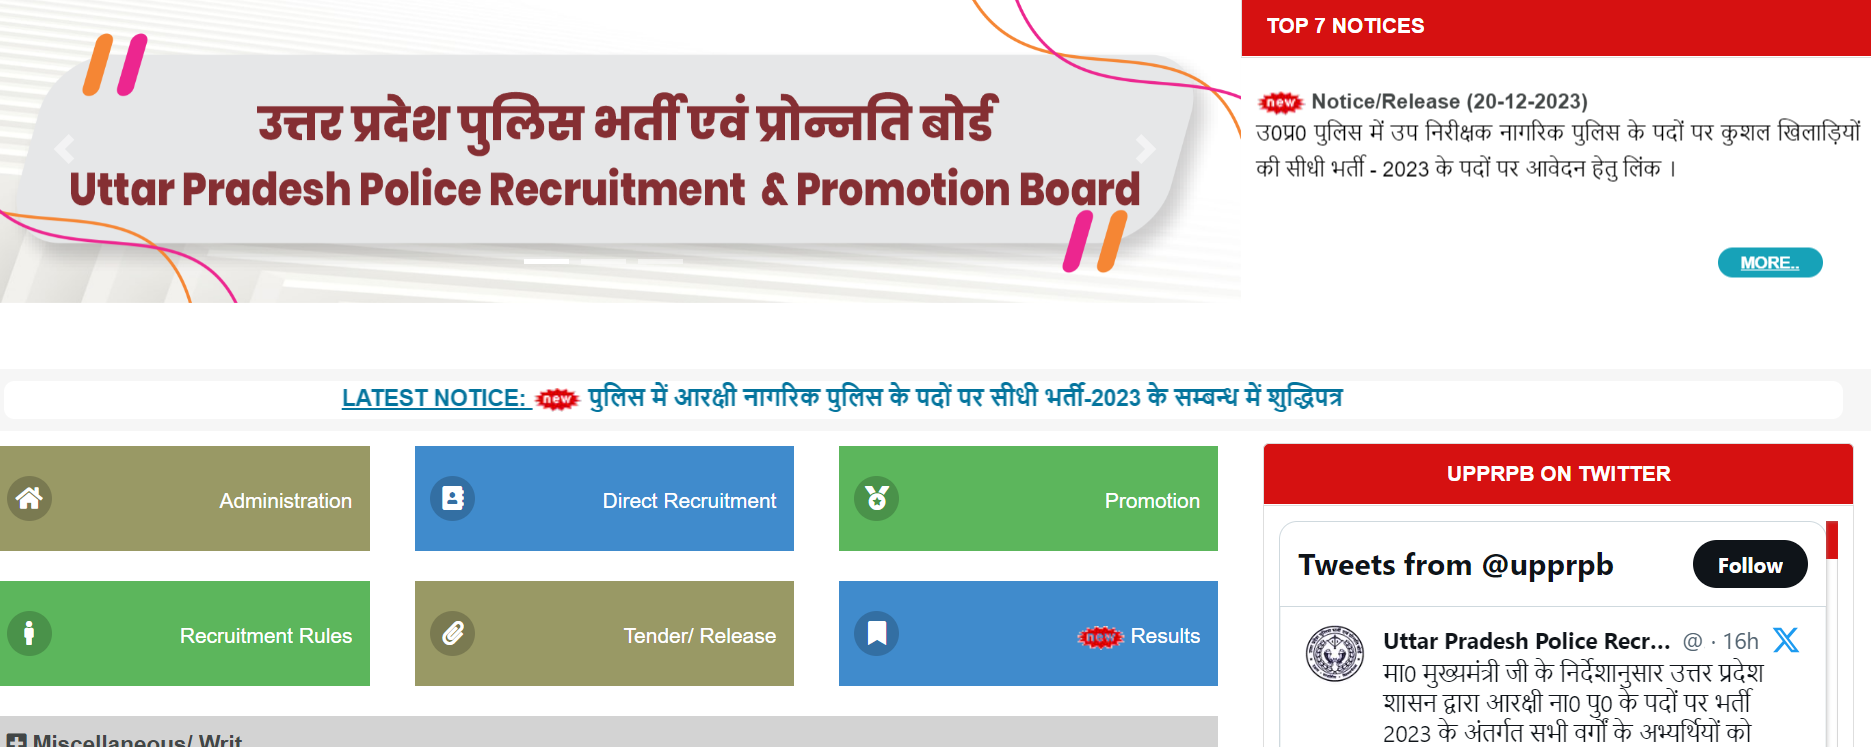 Photo: Screengrab of recruitment page